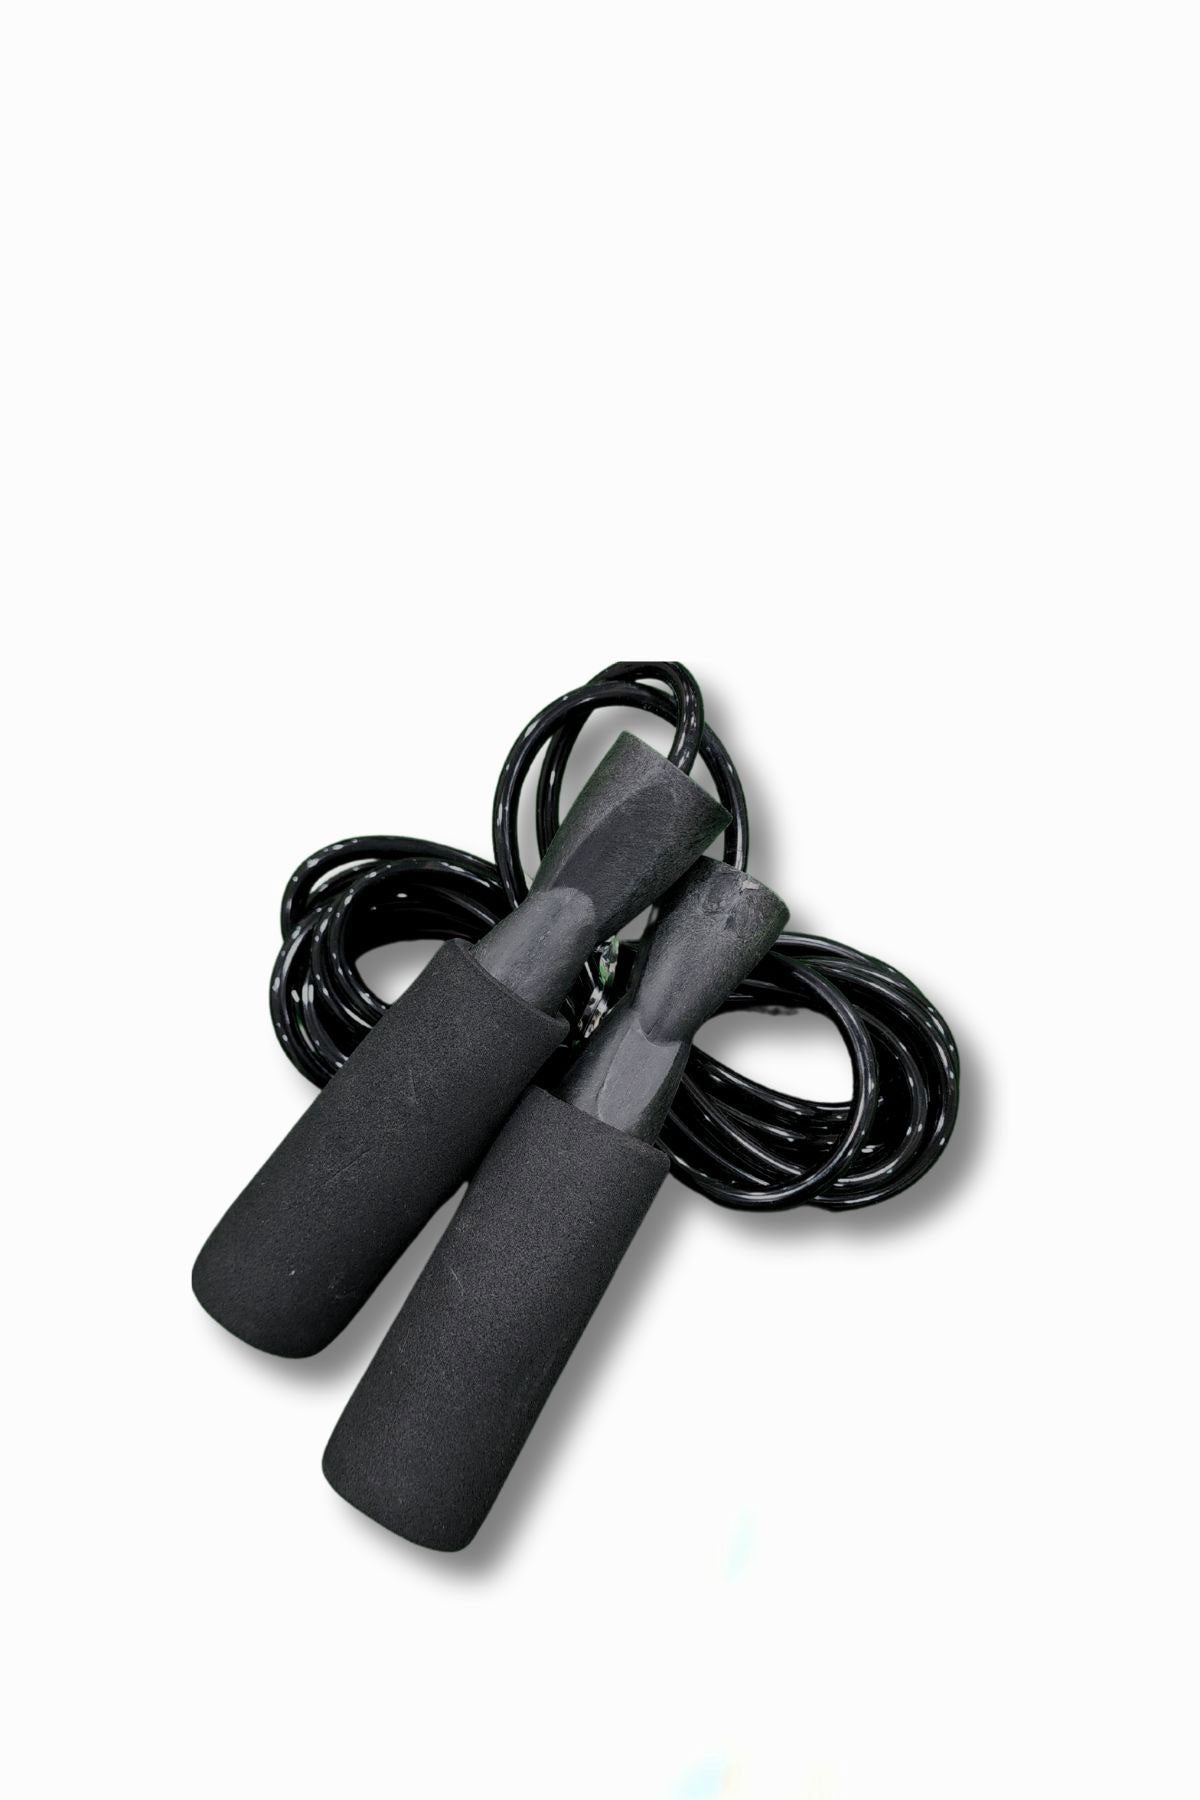 AMPLIFY SKIPPING ROPE- ULTRA BLACK - The Orion Fit